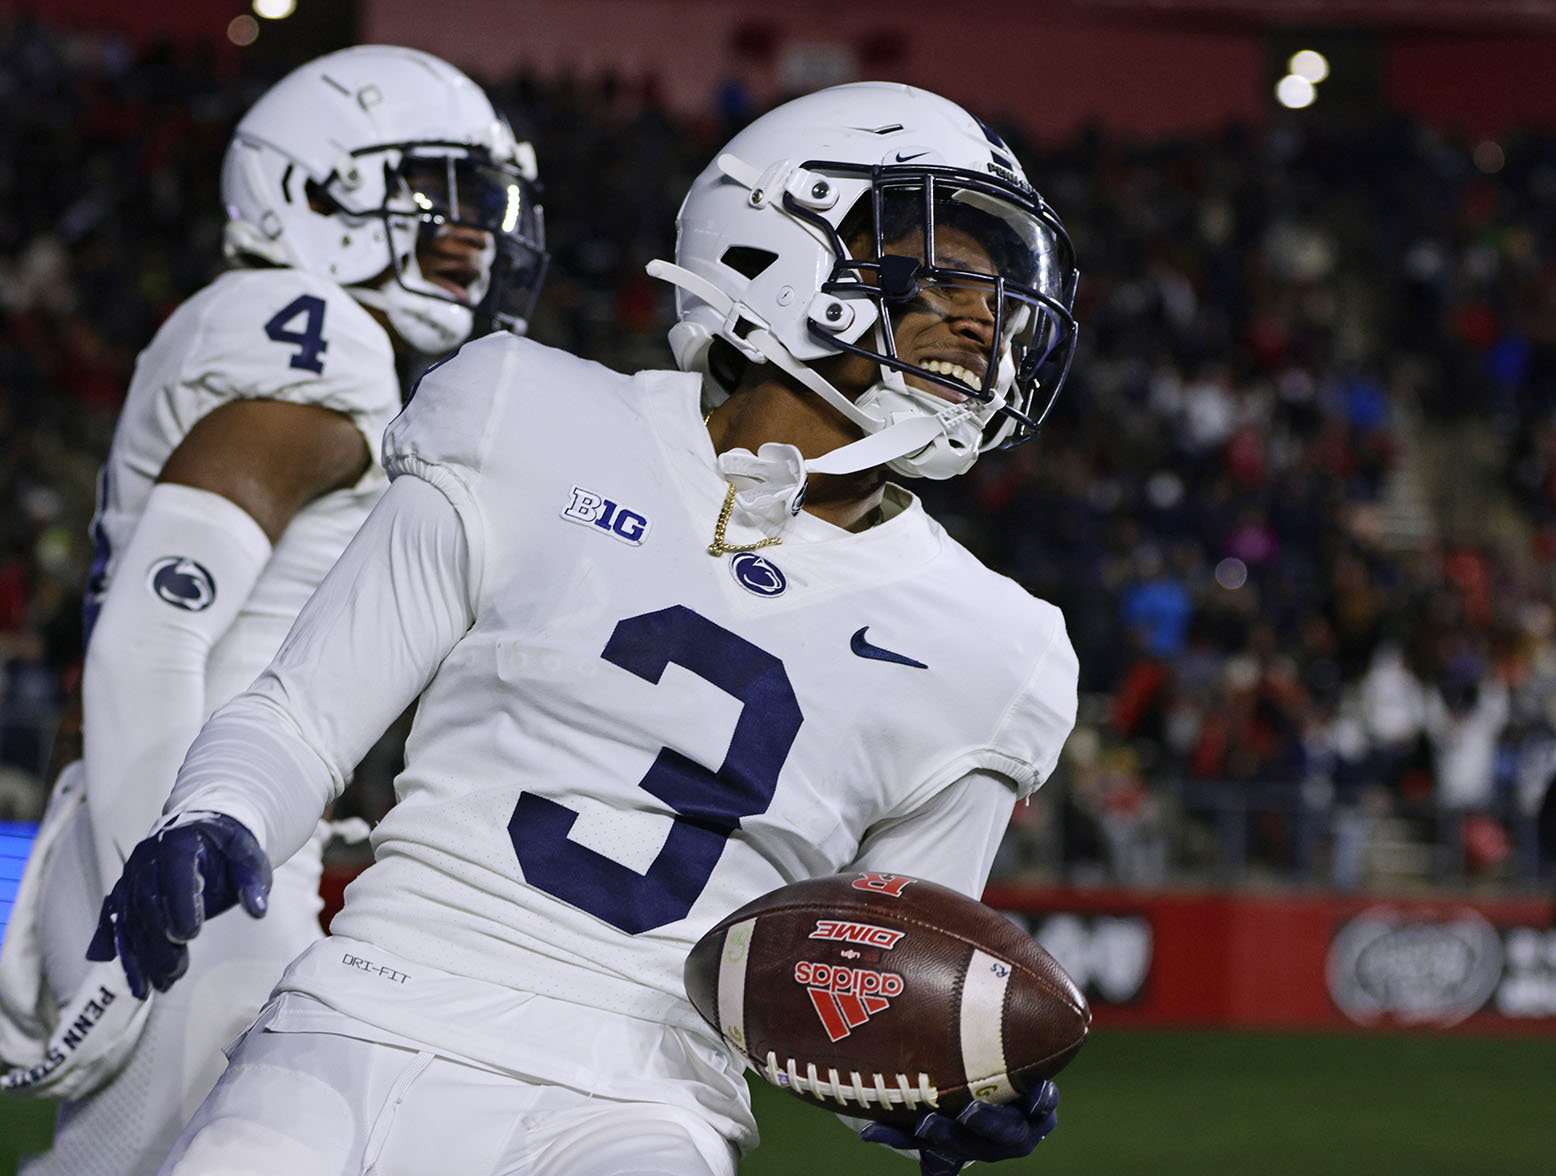 PISCATAWAY, NJ - NOVEMBER 19: Cornerback Johnny Dixon #3 of the Penn State Nittany Lions celebrates his interception against the Rutgers Scarlet Knights during the second quarter of a game at SHI Stadium on November 19, 2022 in Piscataway, New Jersey. (Photo by Rich Schultz/Getty Images)